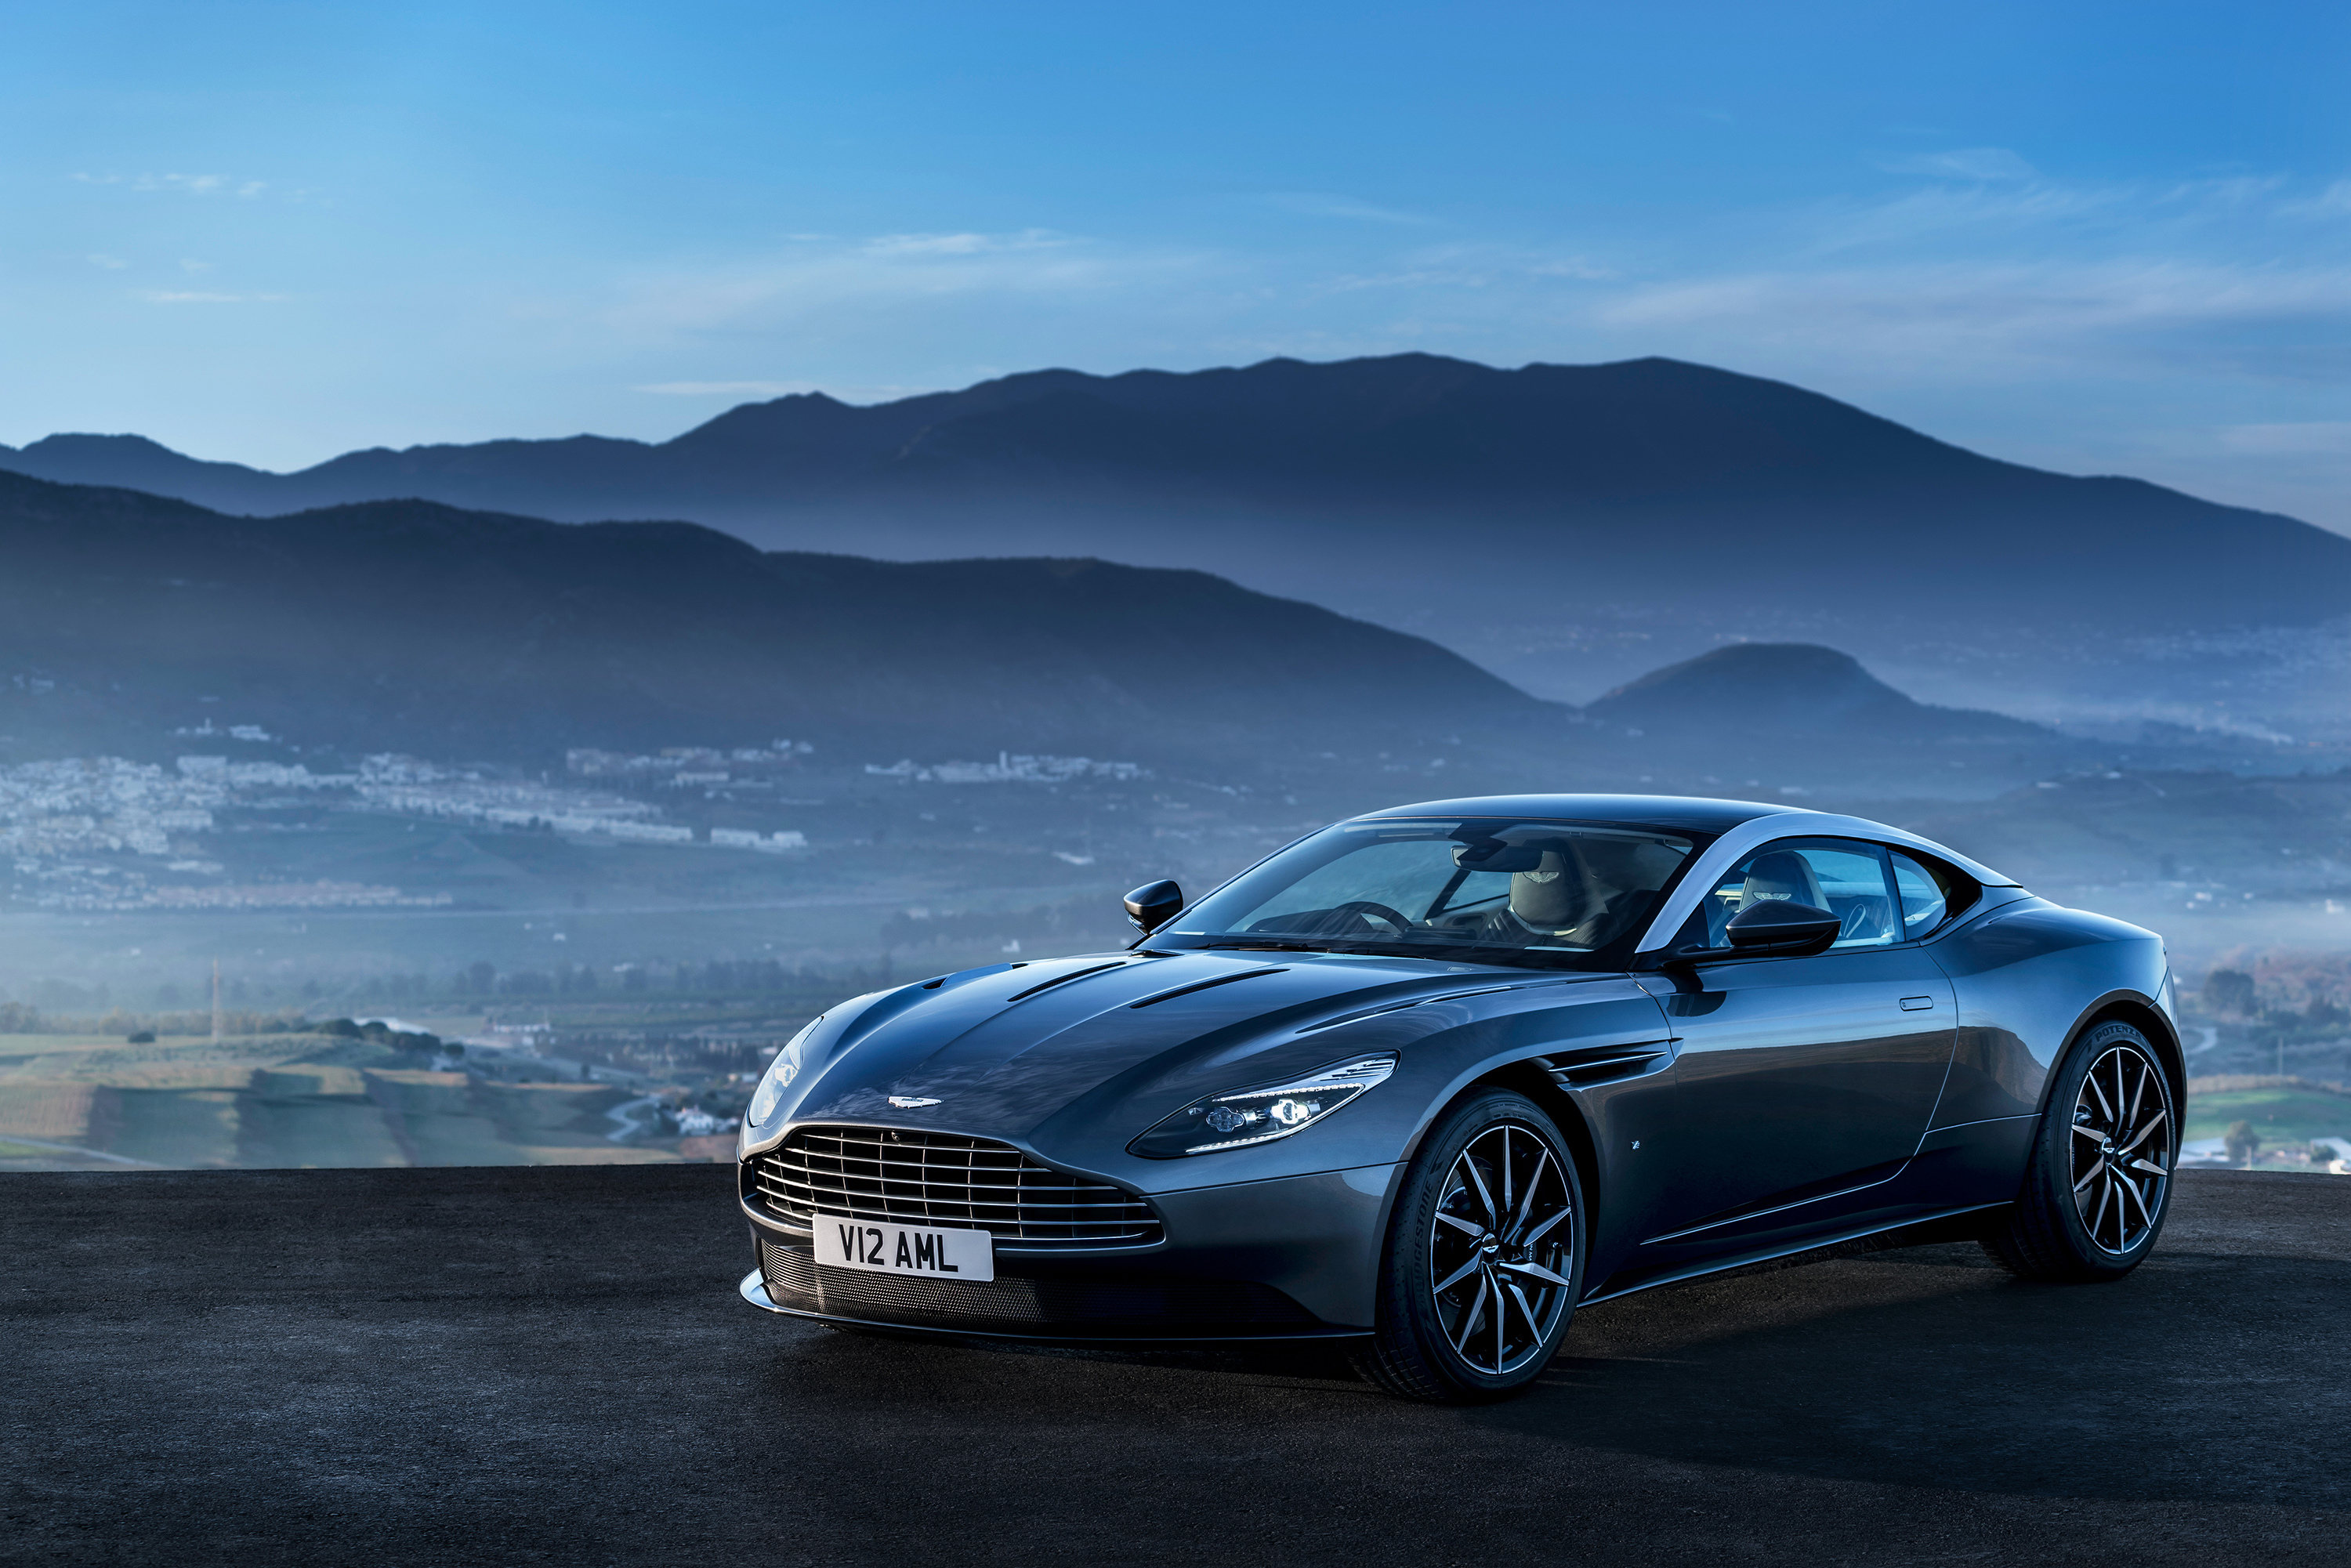 Dow Automotive Systems has supplied Aston Martin with Betamate and Betaforce structural adhesives for the DB11 range.